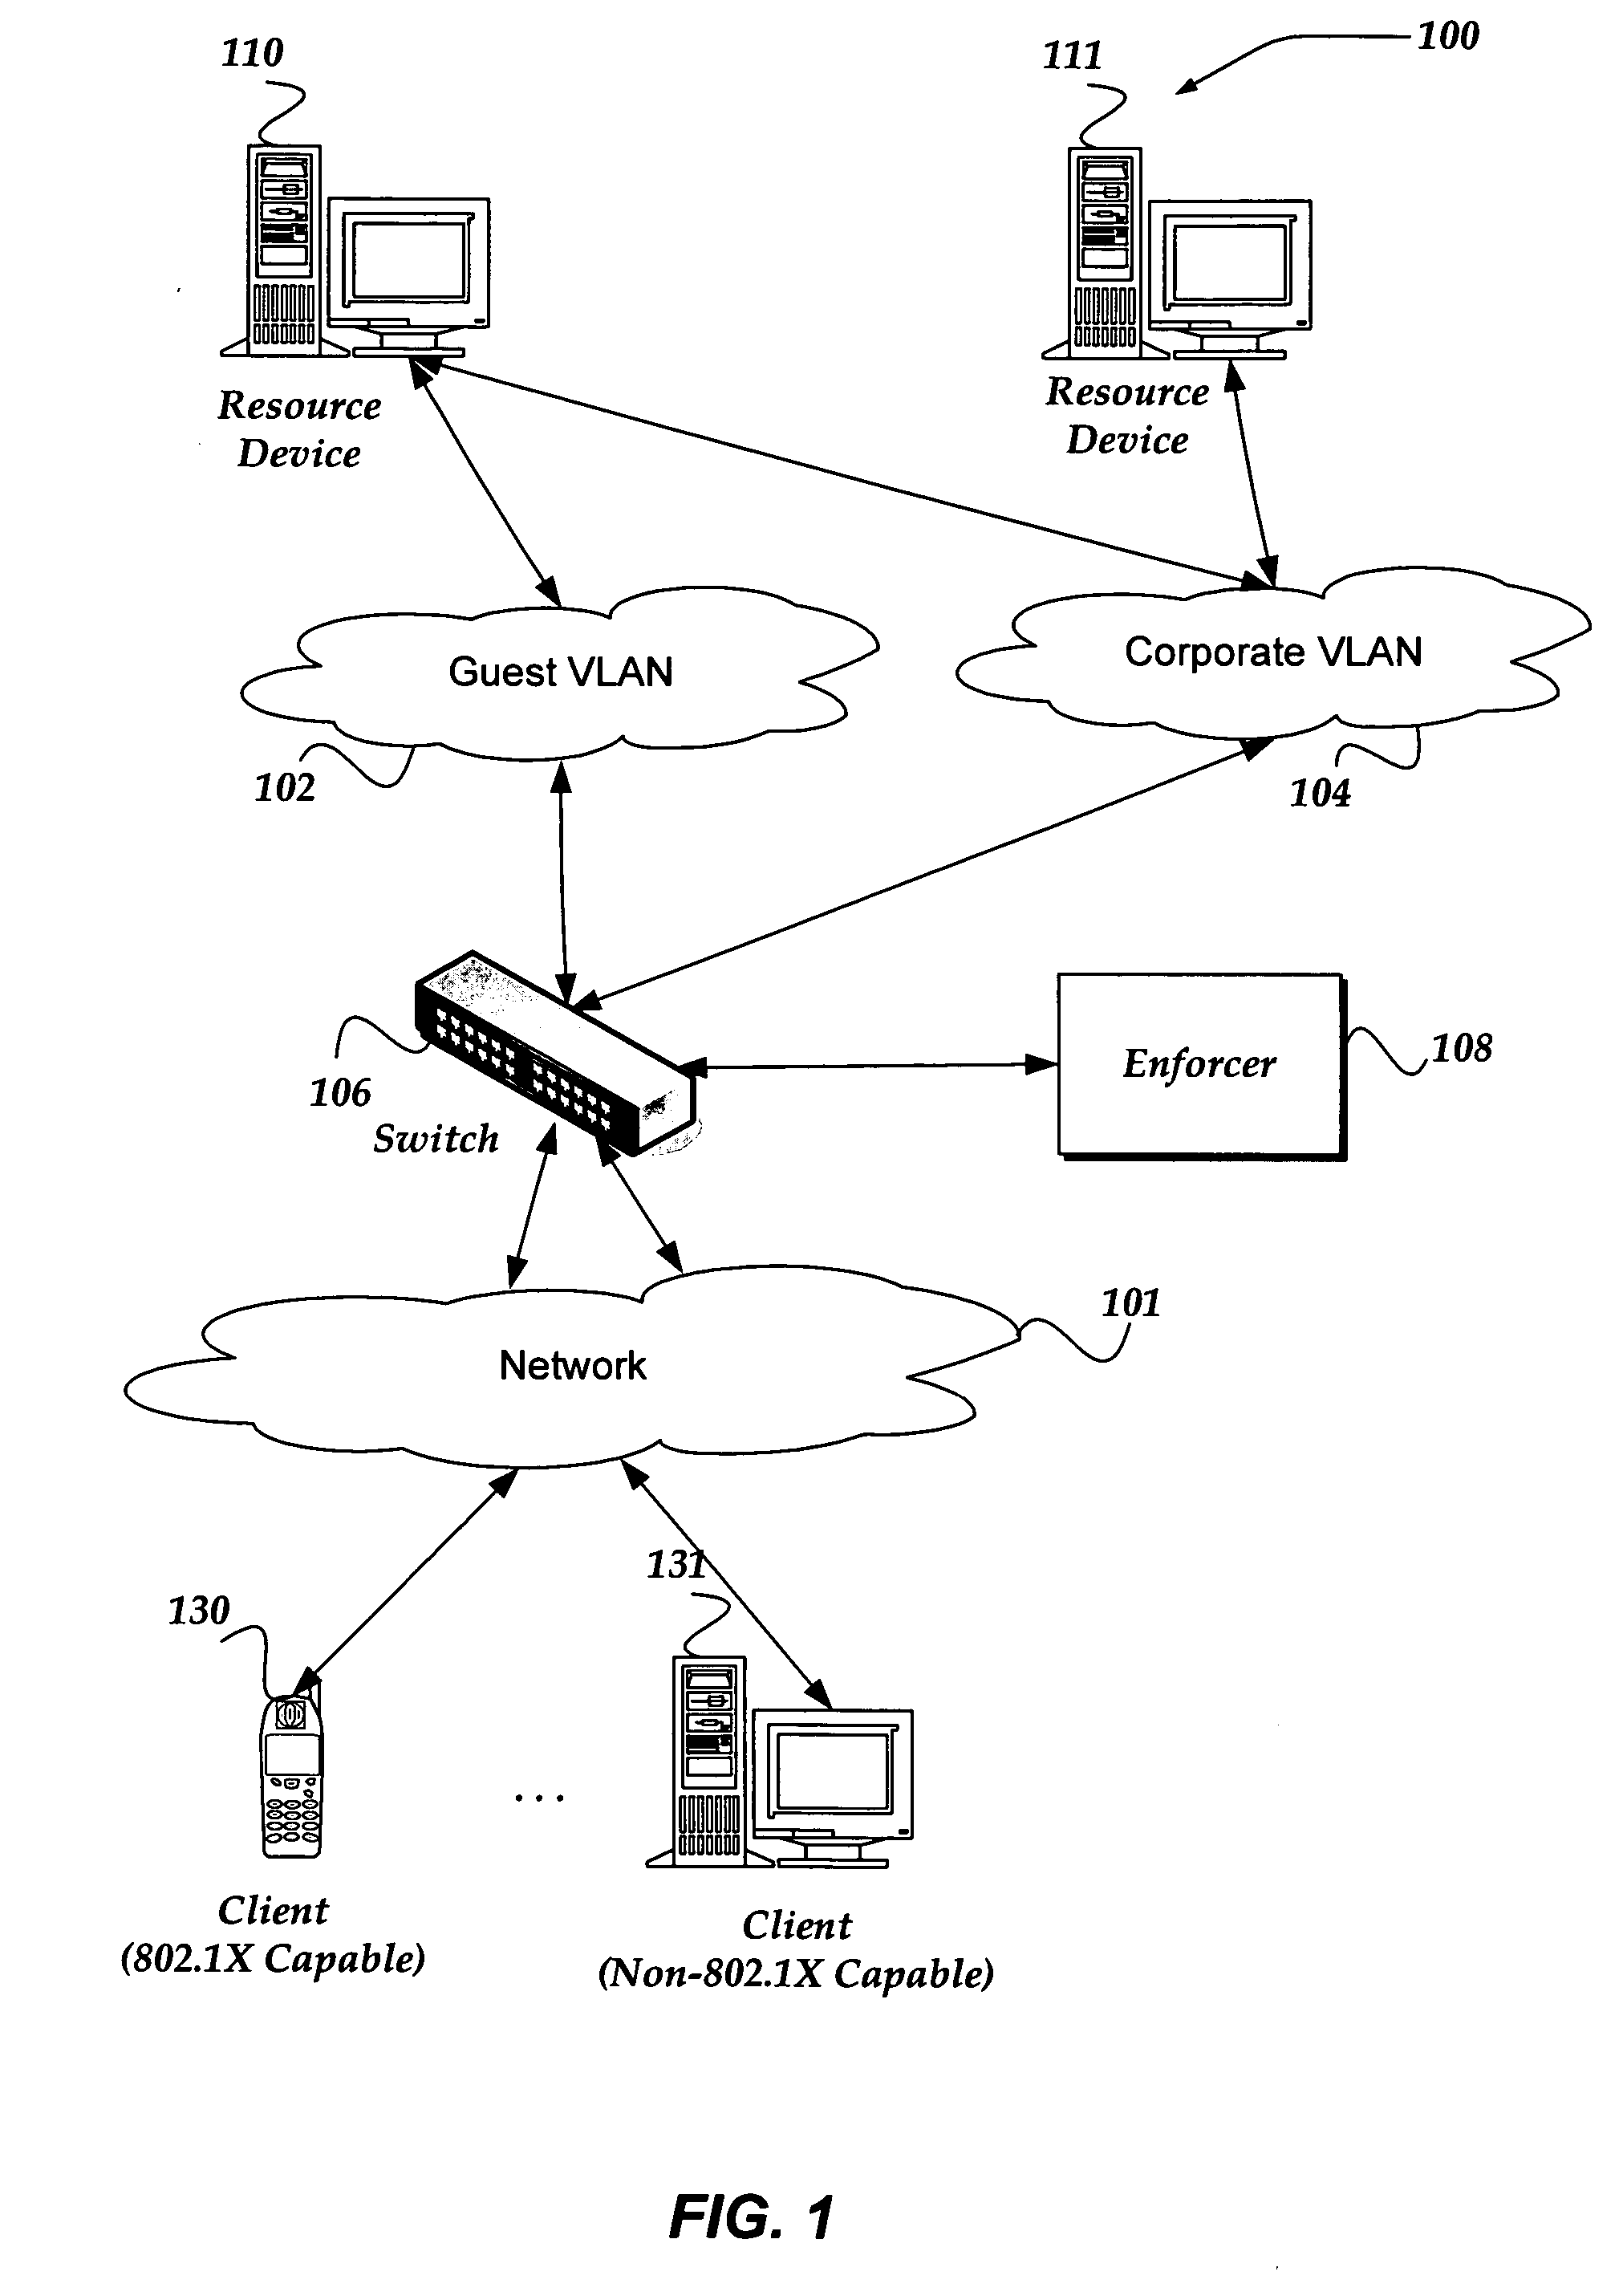 Enabling dynamic authentication with different protocols on the same port for a switch